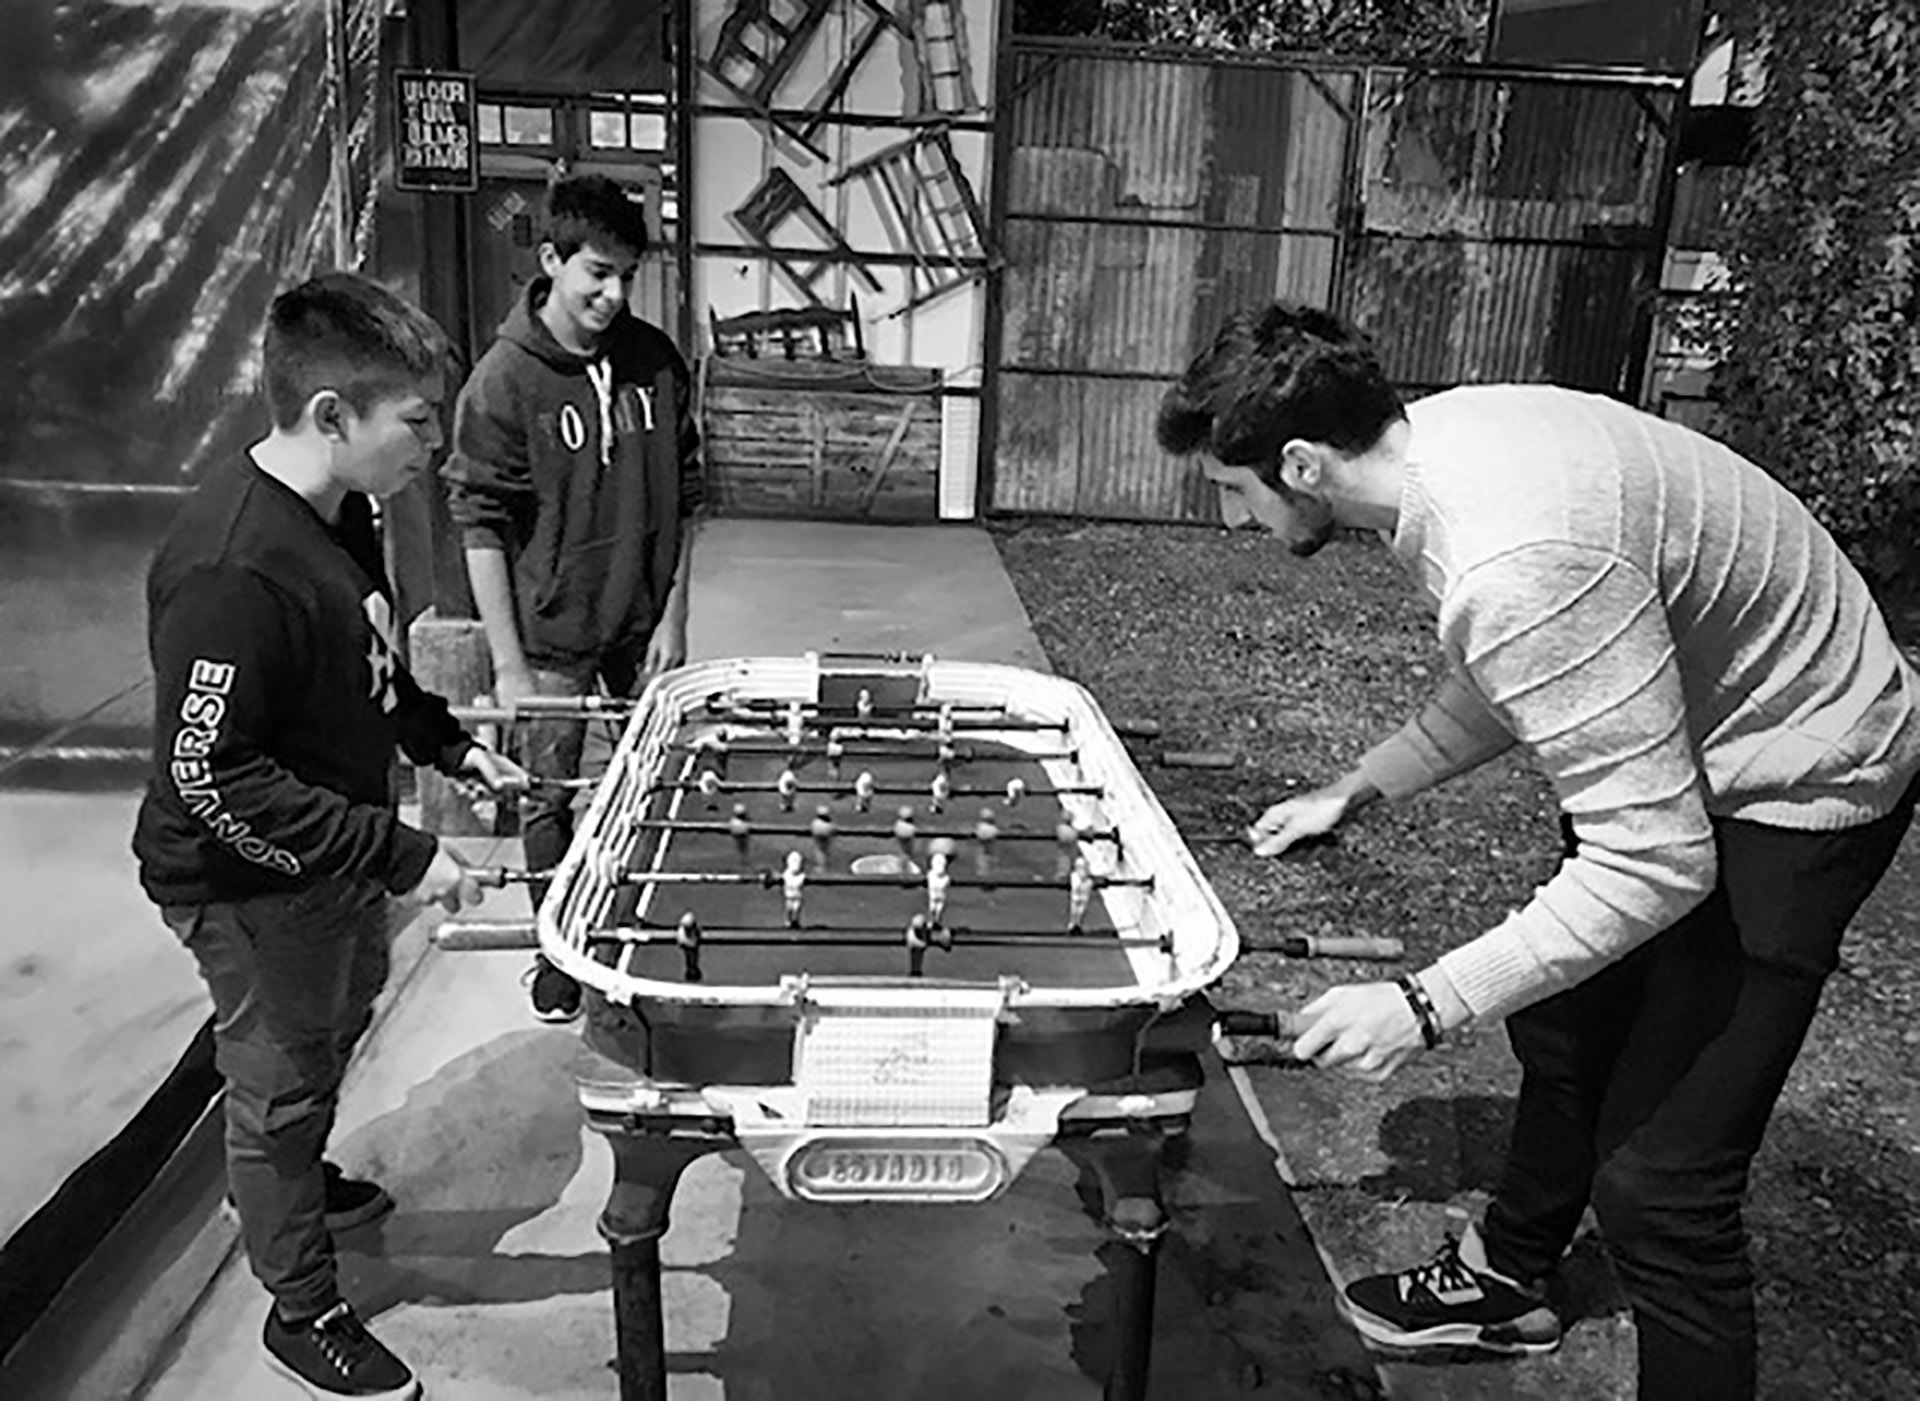 Bolmaro playing foosball with the children of the guests